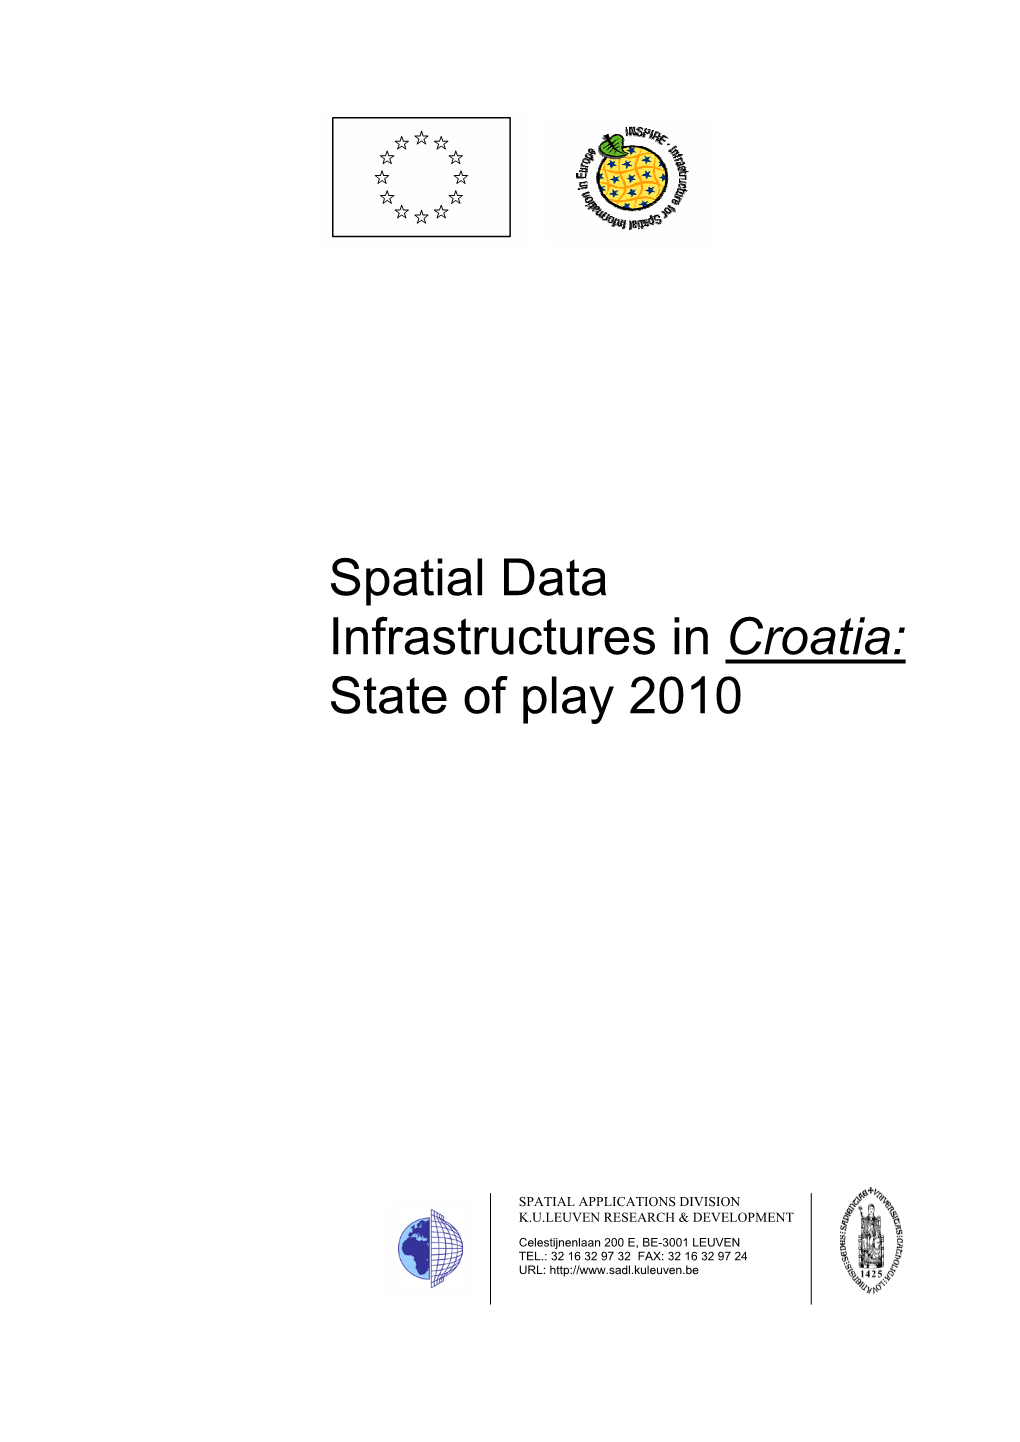 Spatial Data Infrastructures in Croatia: State of Play 2010